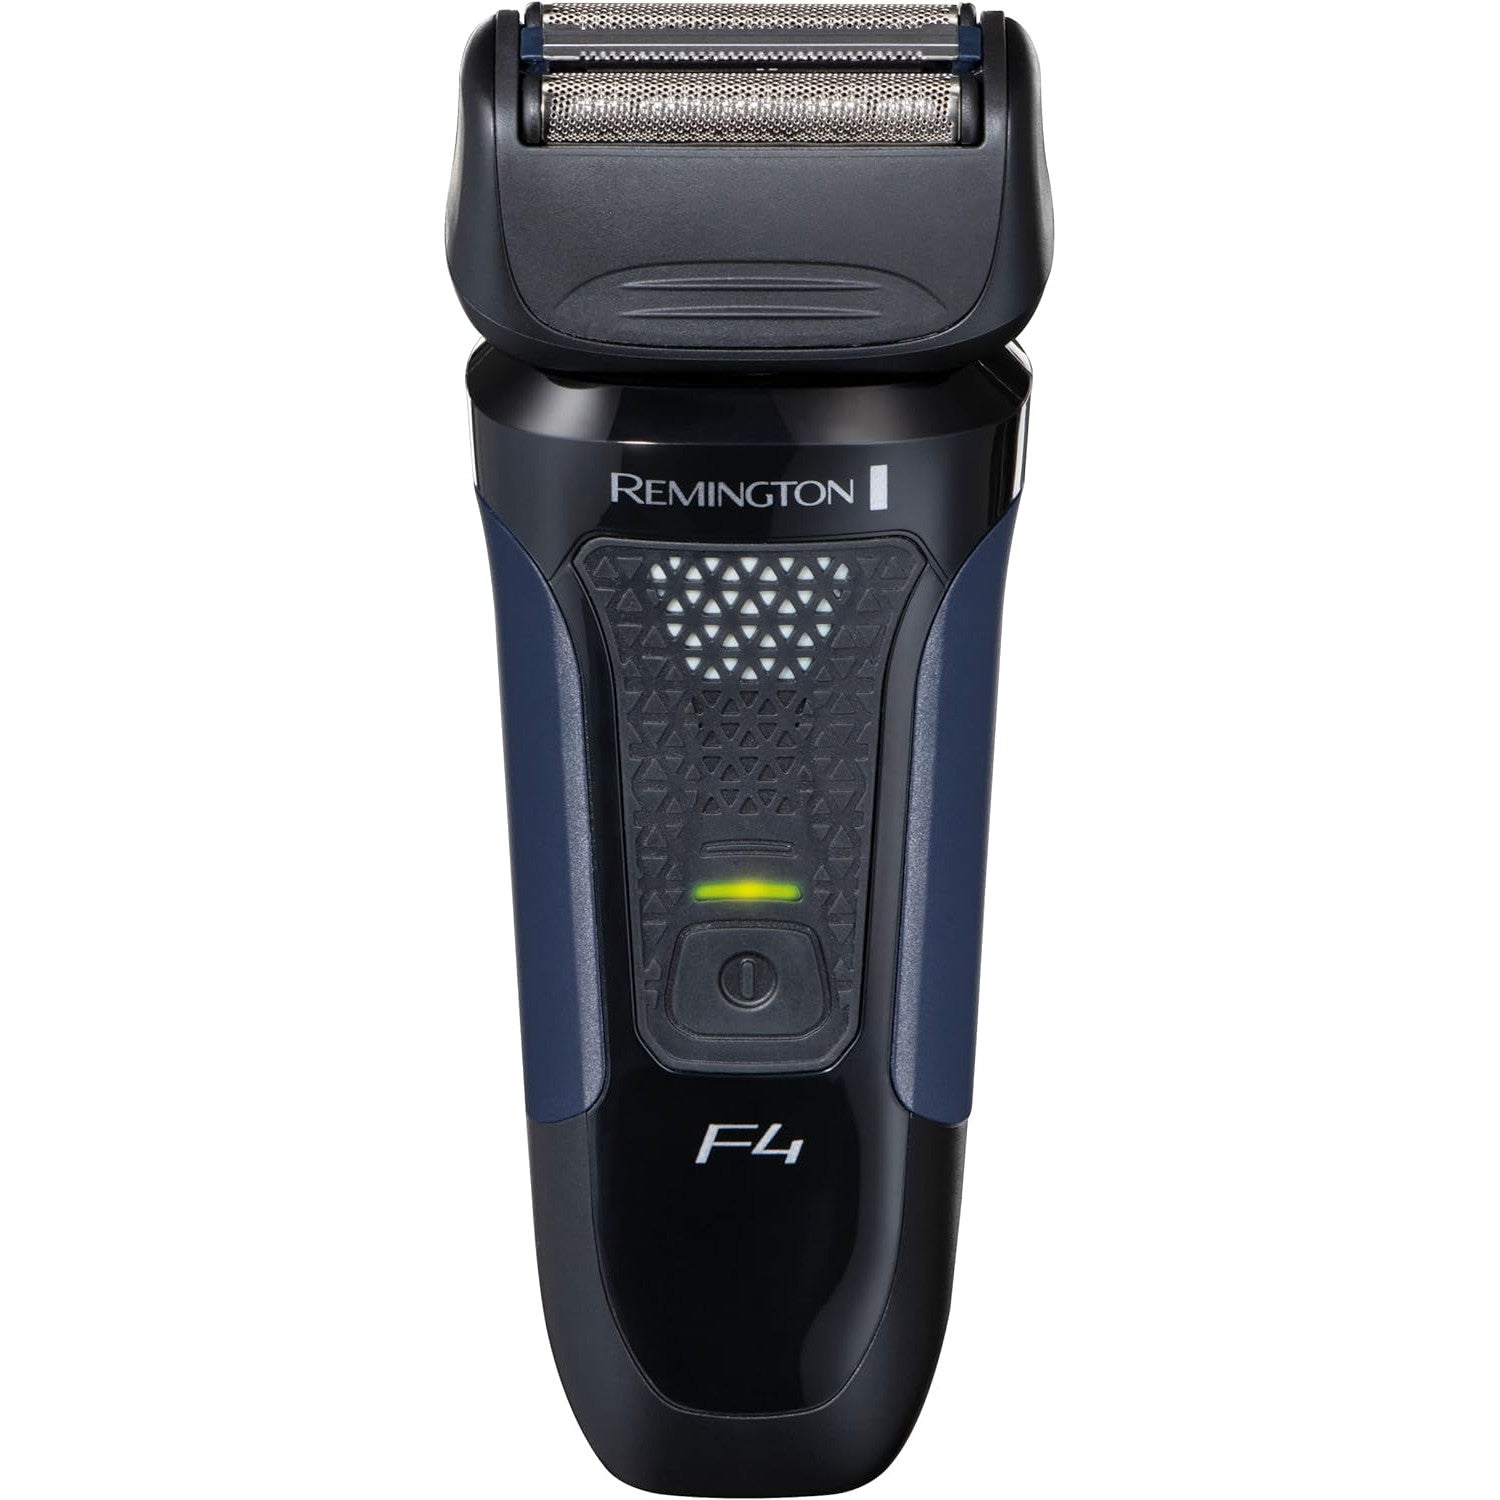 Remington F4 Mens Electric Foil Shaver (Dry Shave, Pop up detail trimmer, 50min usage, 4hr charge, Cordless, Worldwide voltage adjustment, Head guard, Cleaning brush) F4002